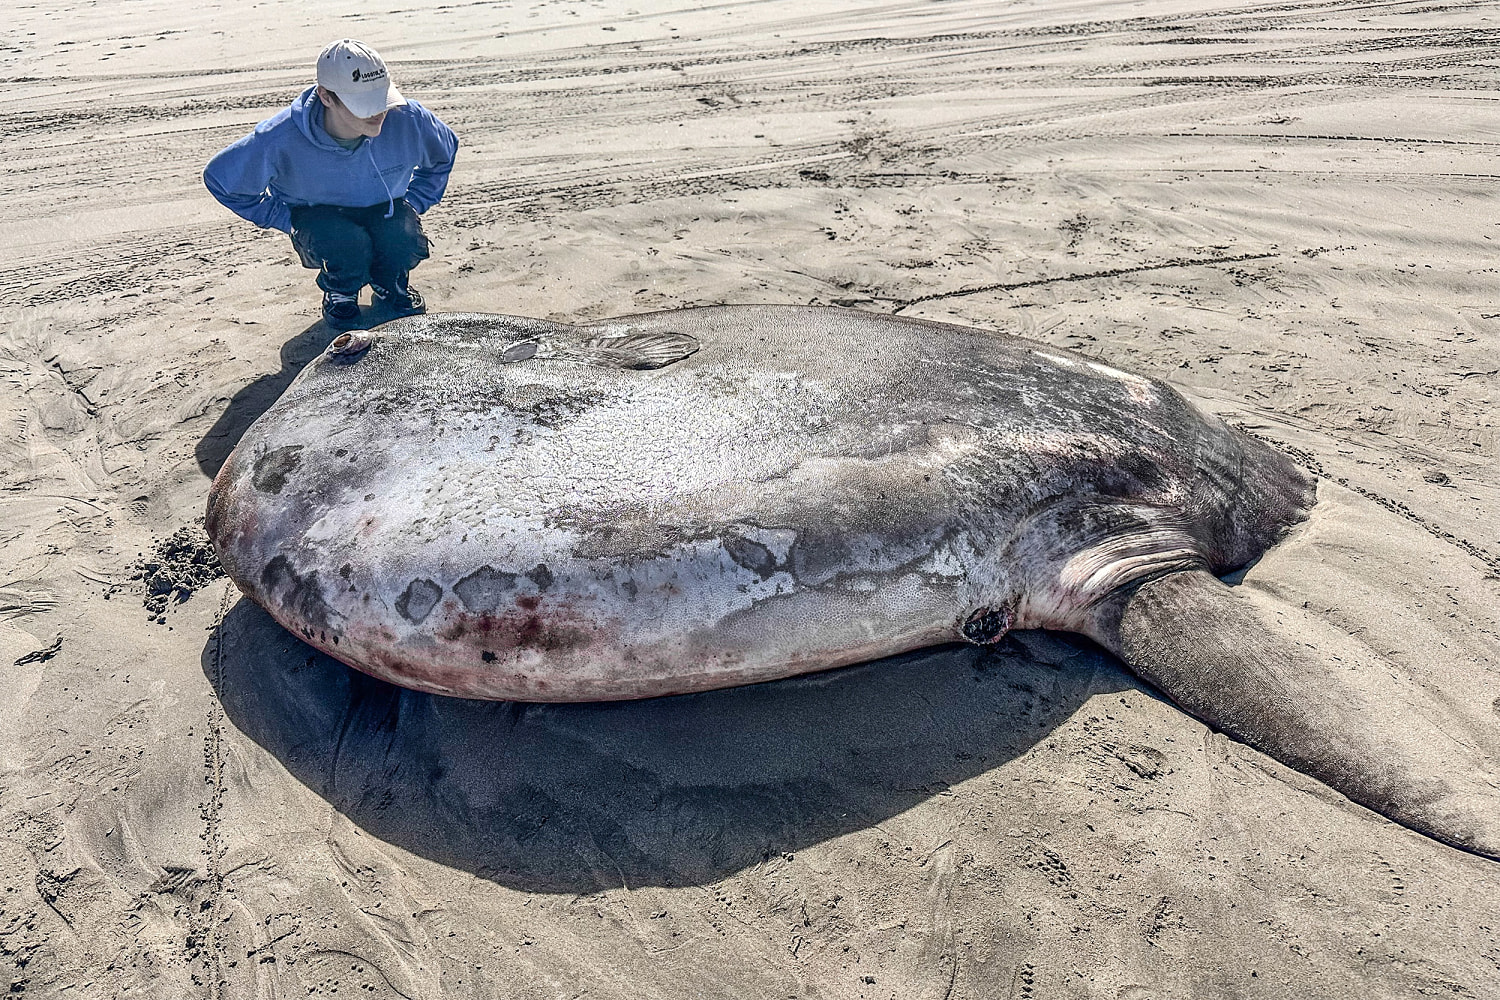 A giant ‘sunbathing’ fish that washed ashore in Oregon turned out to be an unexpected oddity